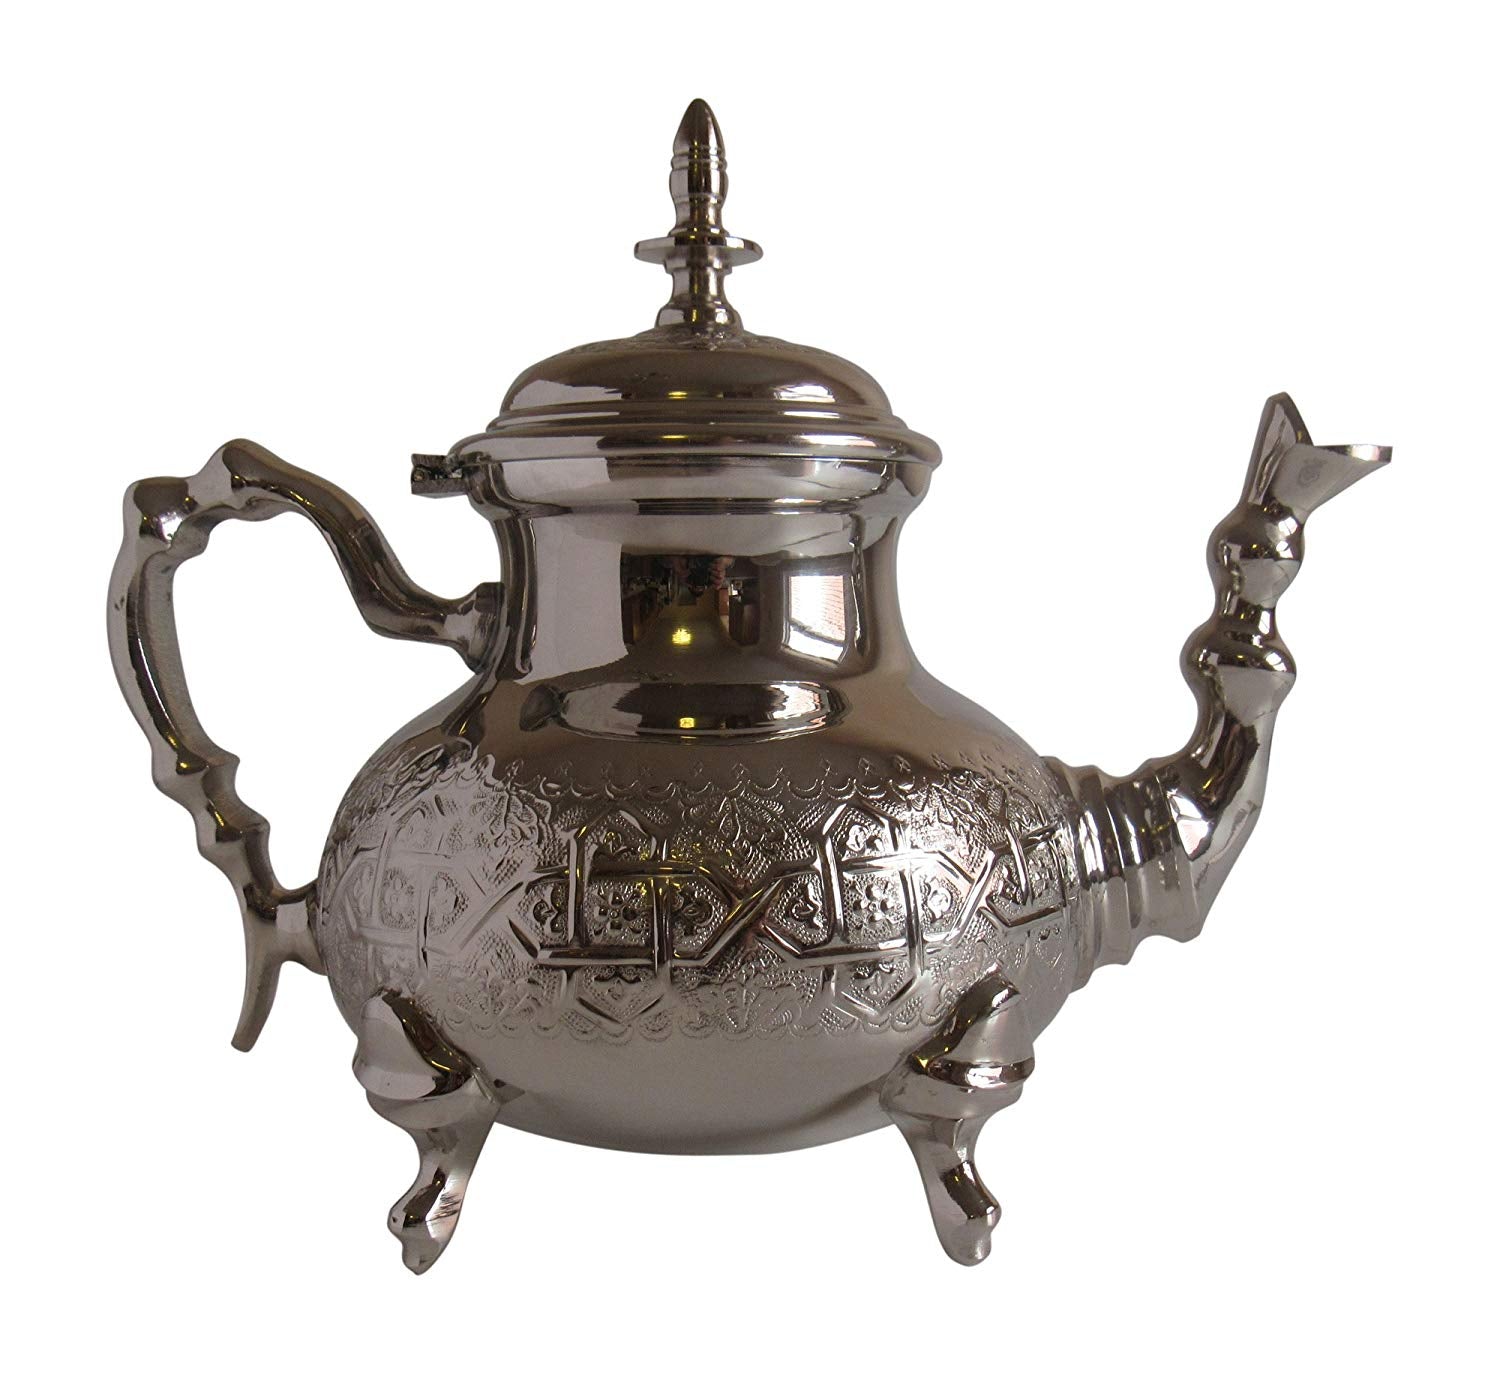 Vintage Styled Handmade Moroccan Silver Plated Teapot with Built In Tea Infuser Filter, 50 ounces - Marrakesh Gardens